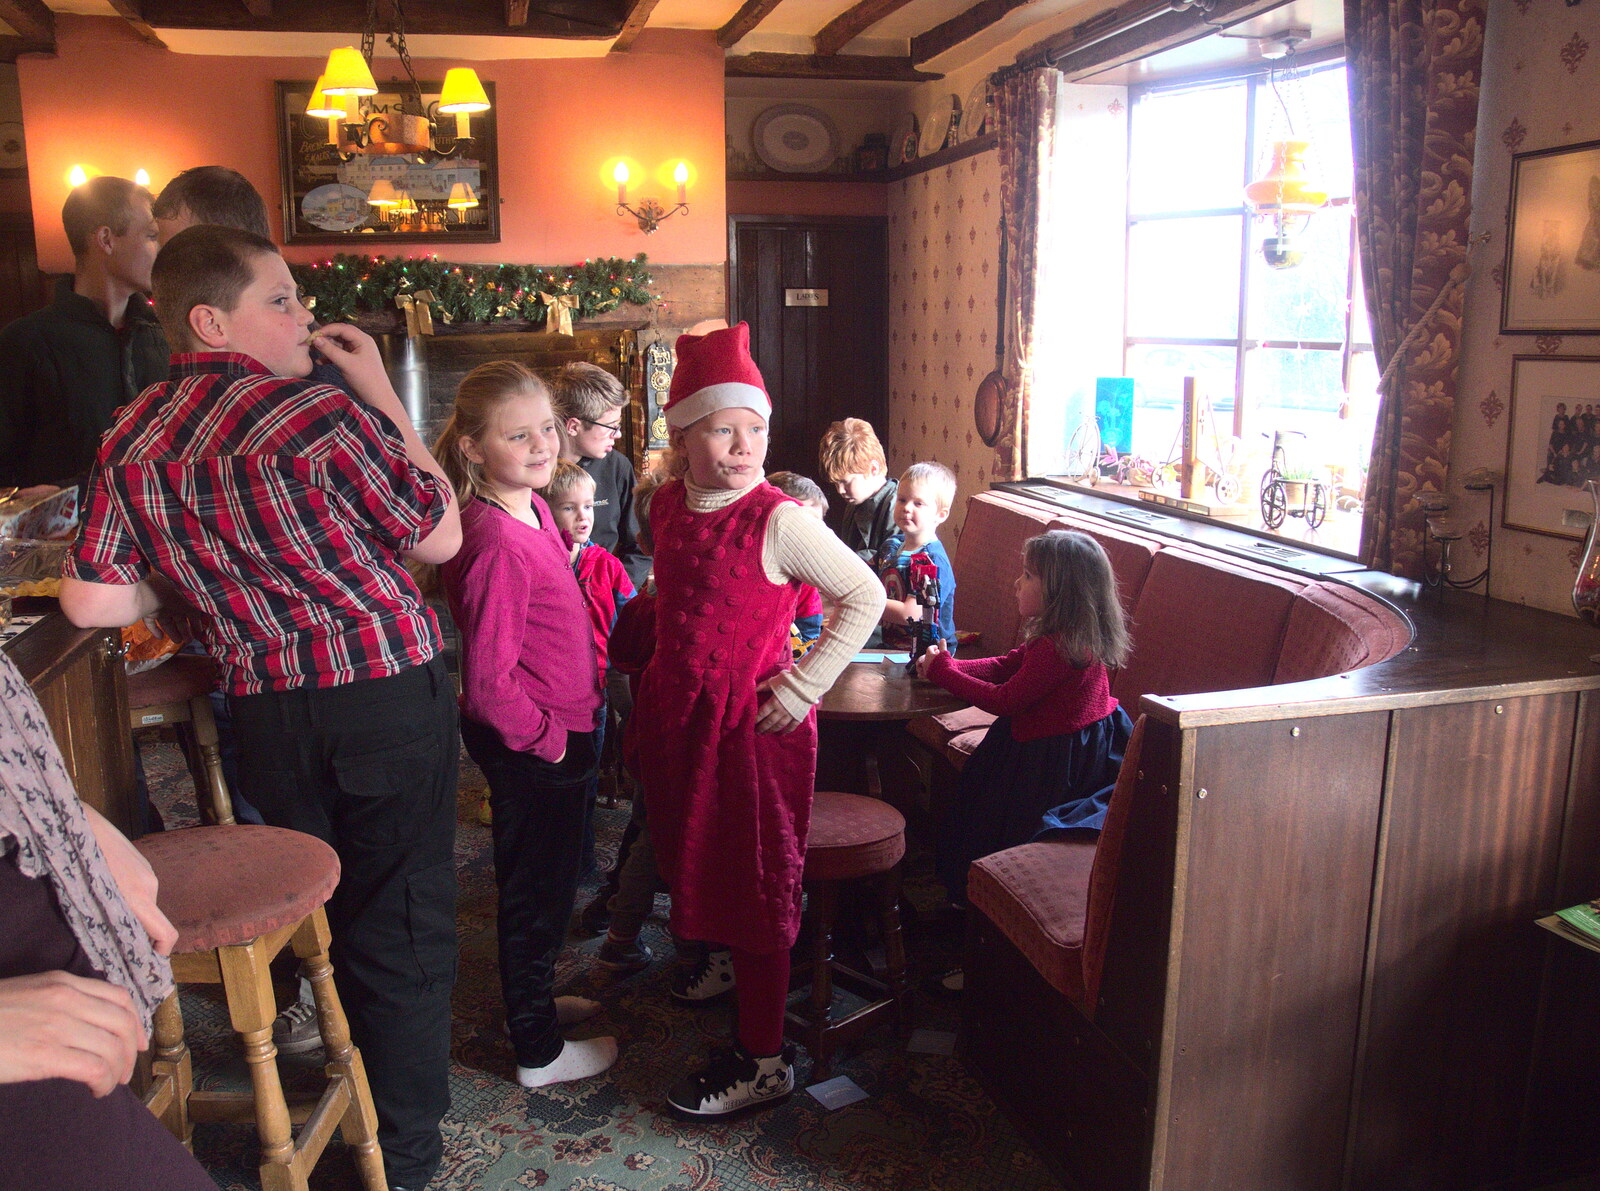 Kids' Corner in the Swan from Christmas and All That, Brome, Suffolk - 25th December 2016